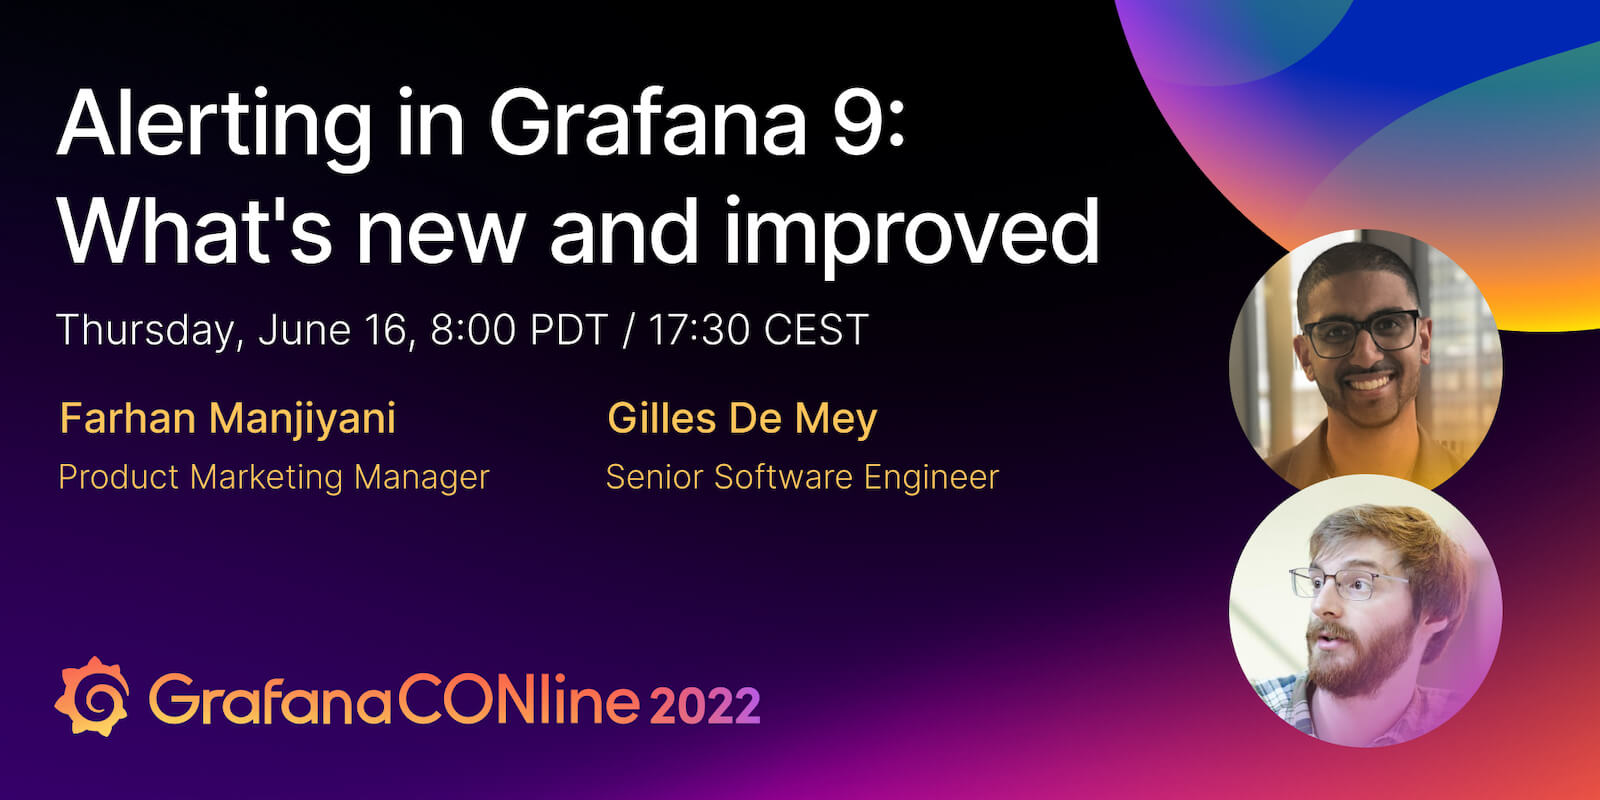 Alerting in Grafana 9: What's new and improved